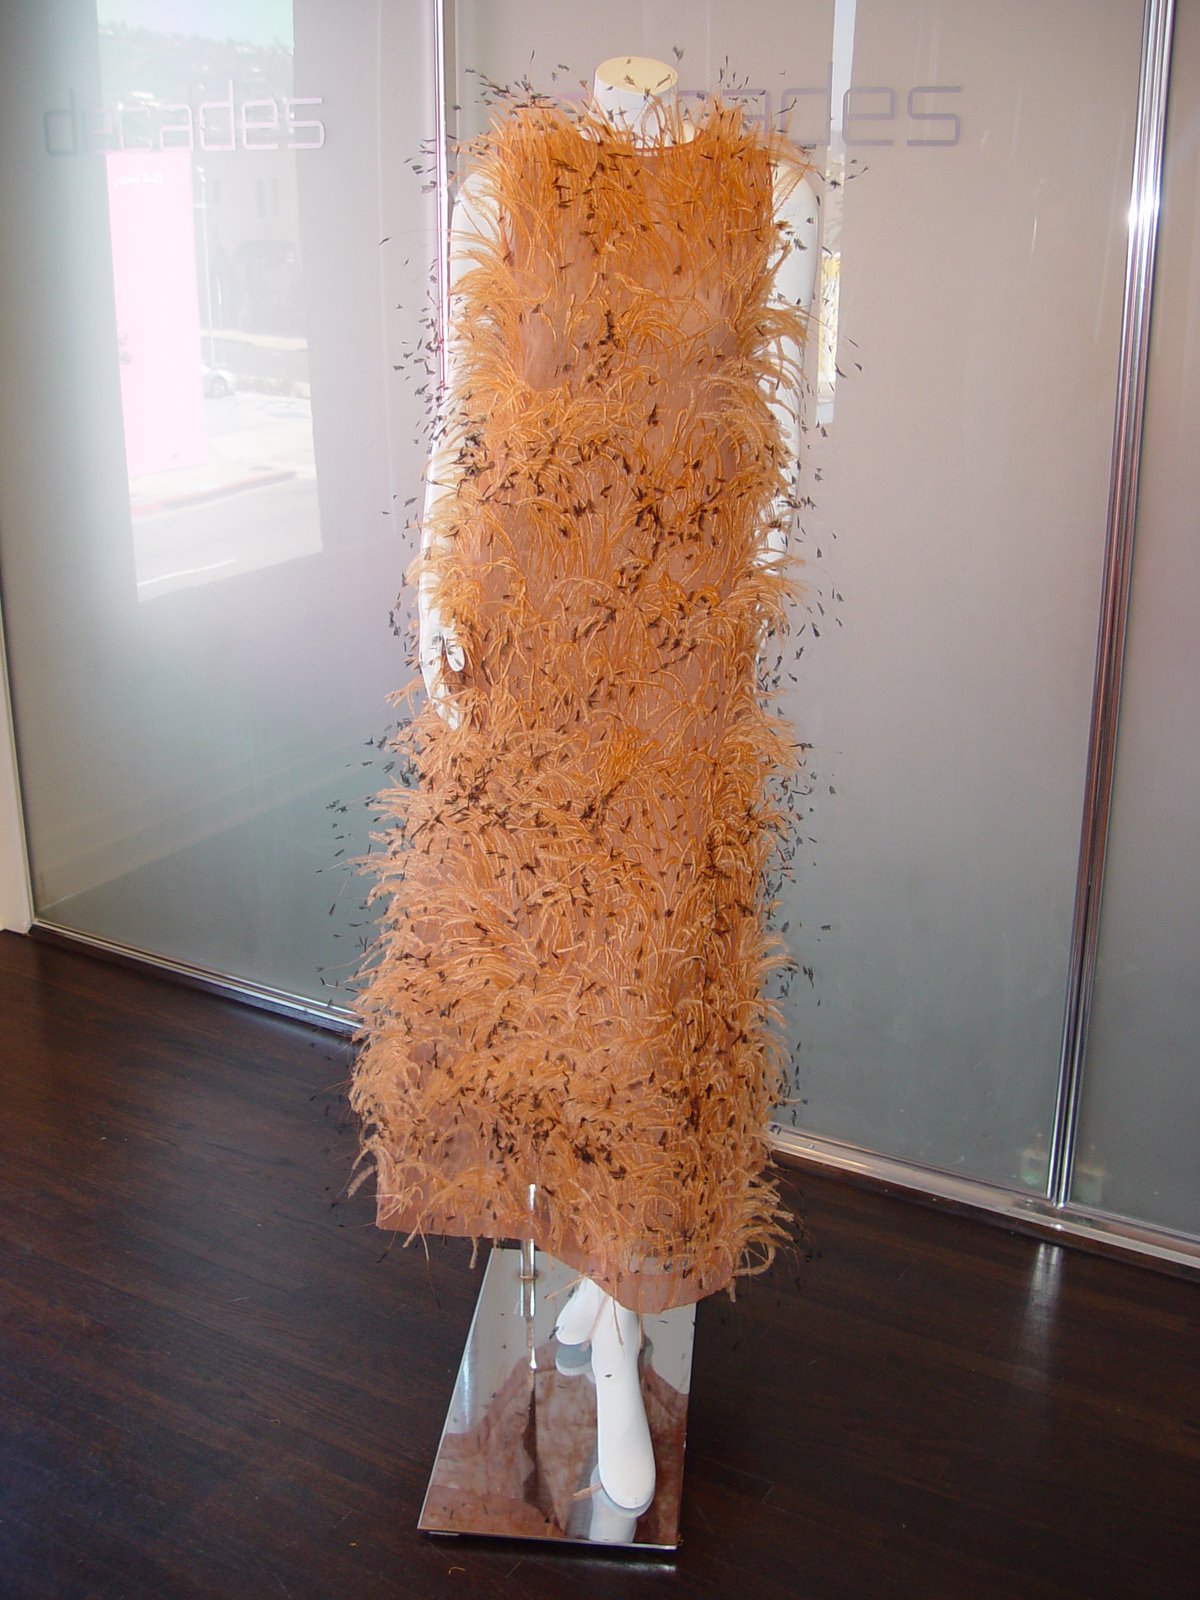 [BALENCIAGA+SHAVED+OSTRICH+FEATHERS+HANDYED+EYED+AND+INDIVIDUALLY+APPLIED+TO+SILK+WITH+SLIP+OR+JUMP+SUIT+OPITONS+FALL+1965.JPG.JPG]